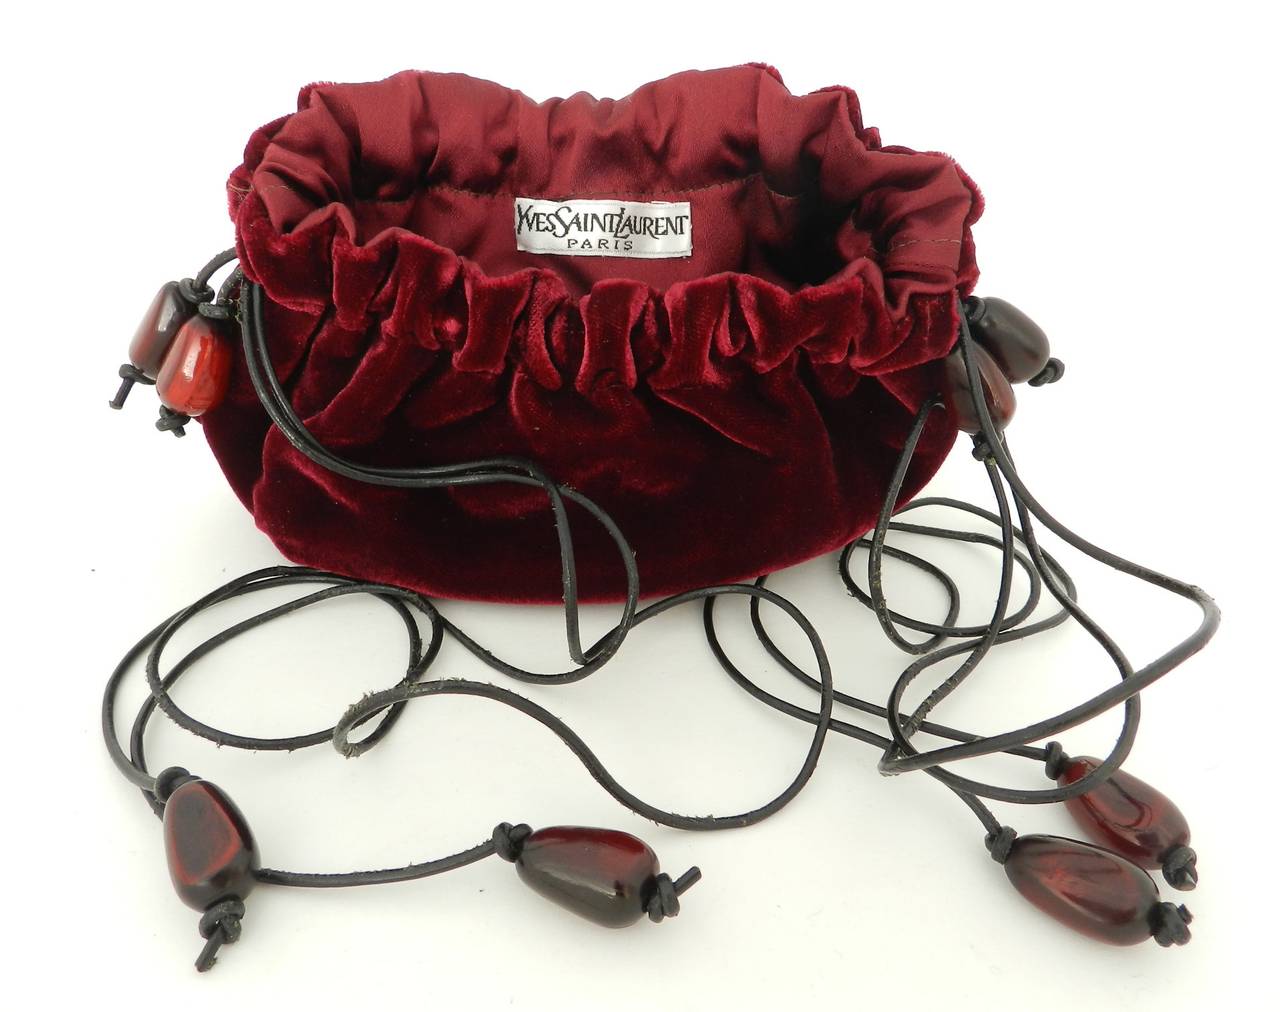 Small vintage YSL Yves Saint Laurent red velvet evening bag. Drawstring on leather cords with tagua nut beads. Circa 1990's. Body measures about 5 x 4.5 x 2.5